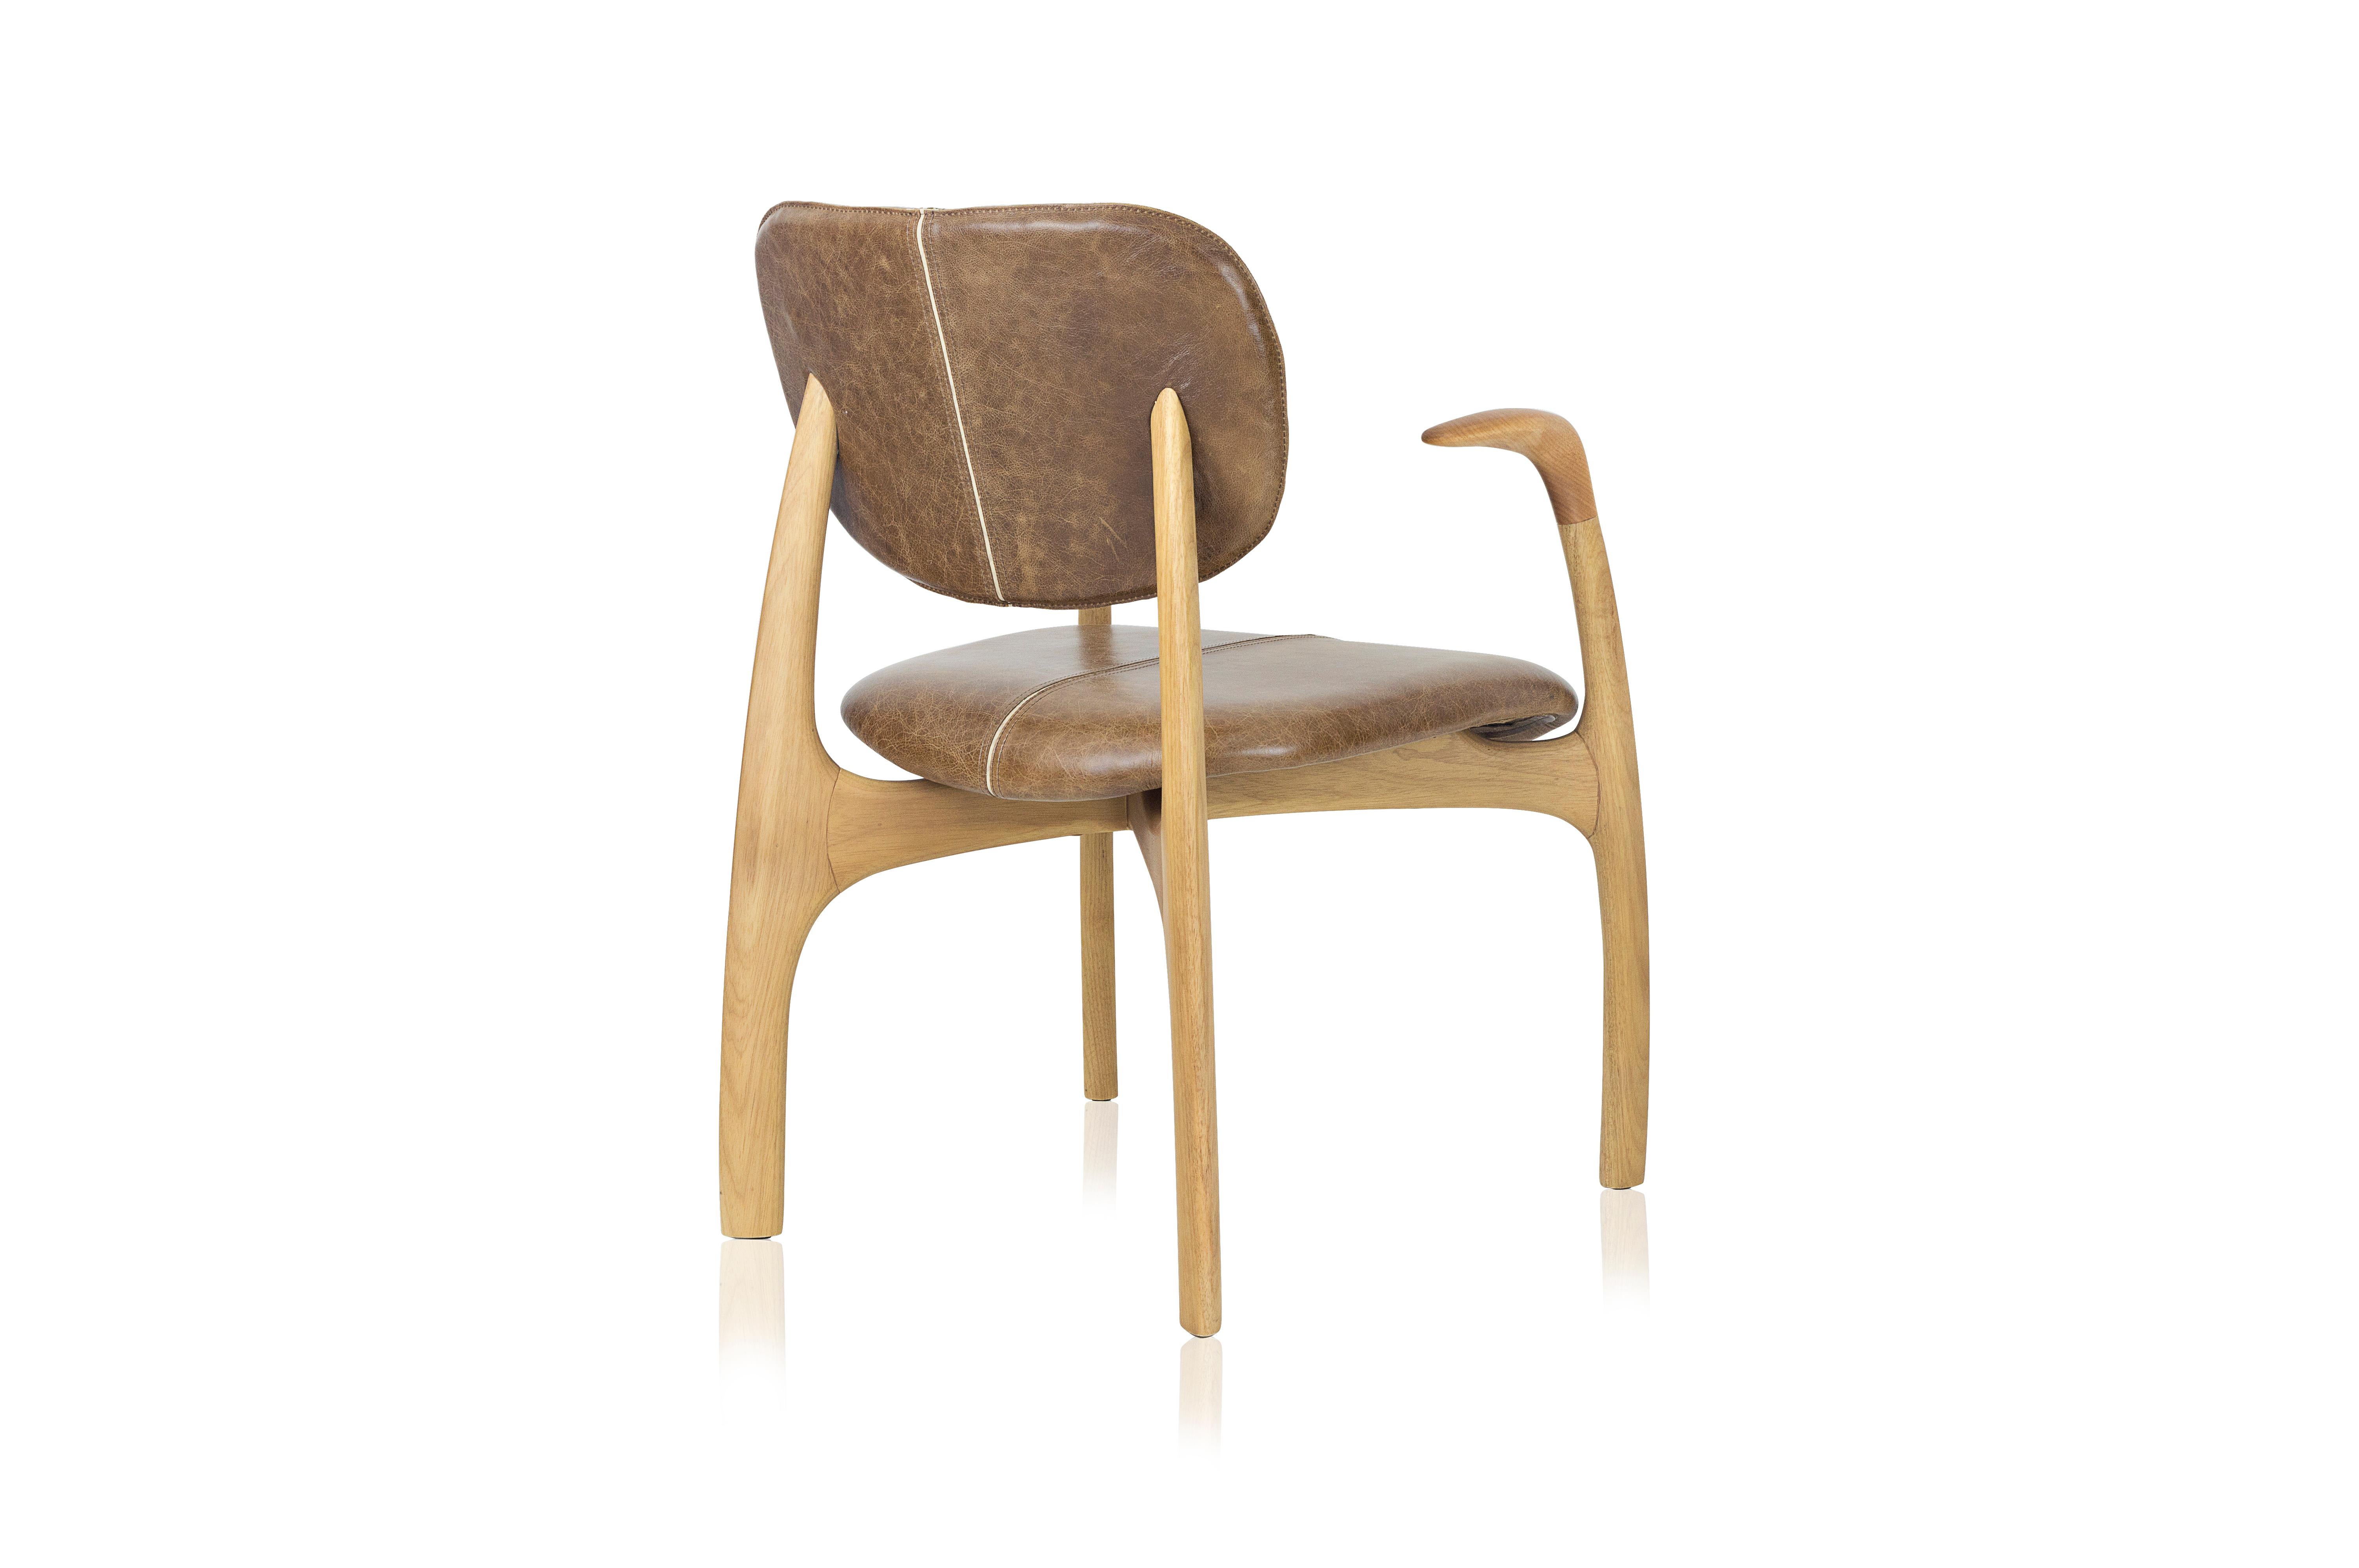 Surf Brazilian Contemporary Wood and Leather Chair with Arms by Lattoog In New Condition For Sale In Sao Paolo, BR